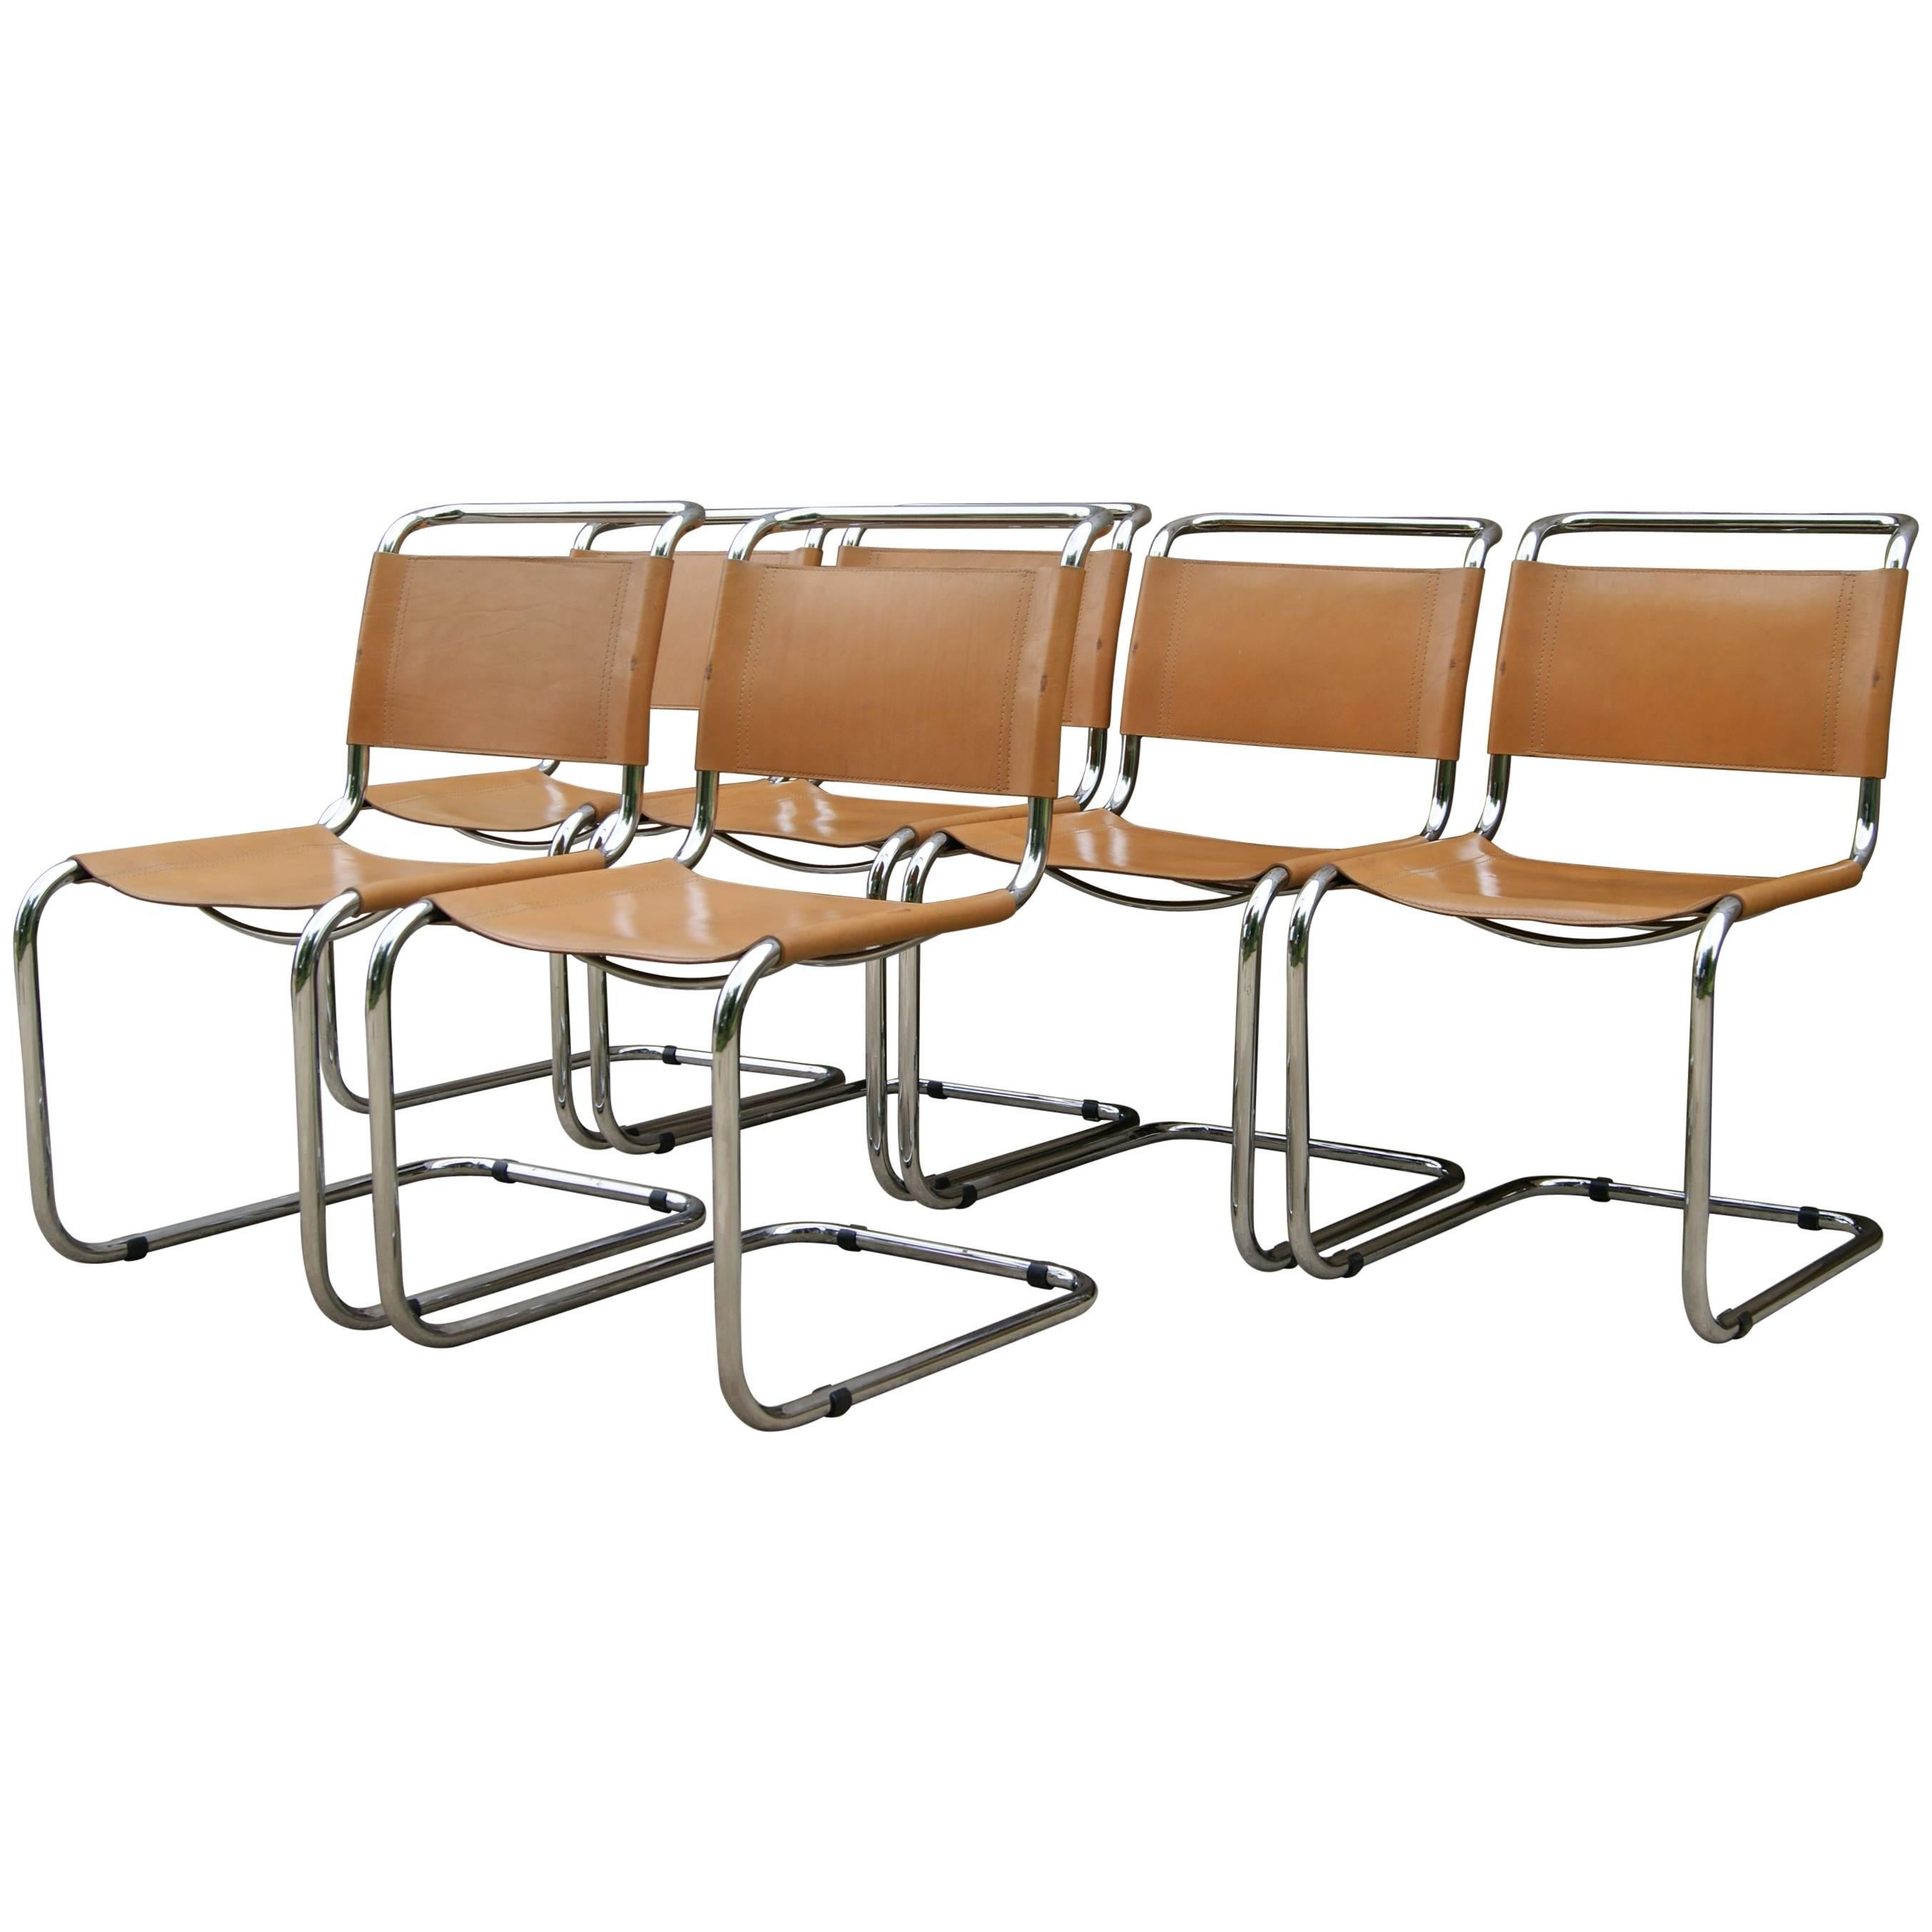 Six Mart Stam Cantilever Dining Chairs, Saddle Leather with Tubular Steel